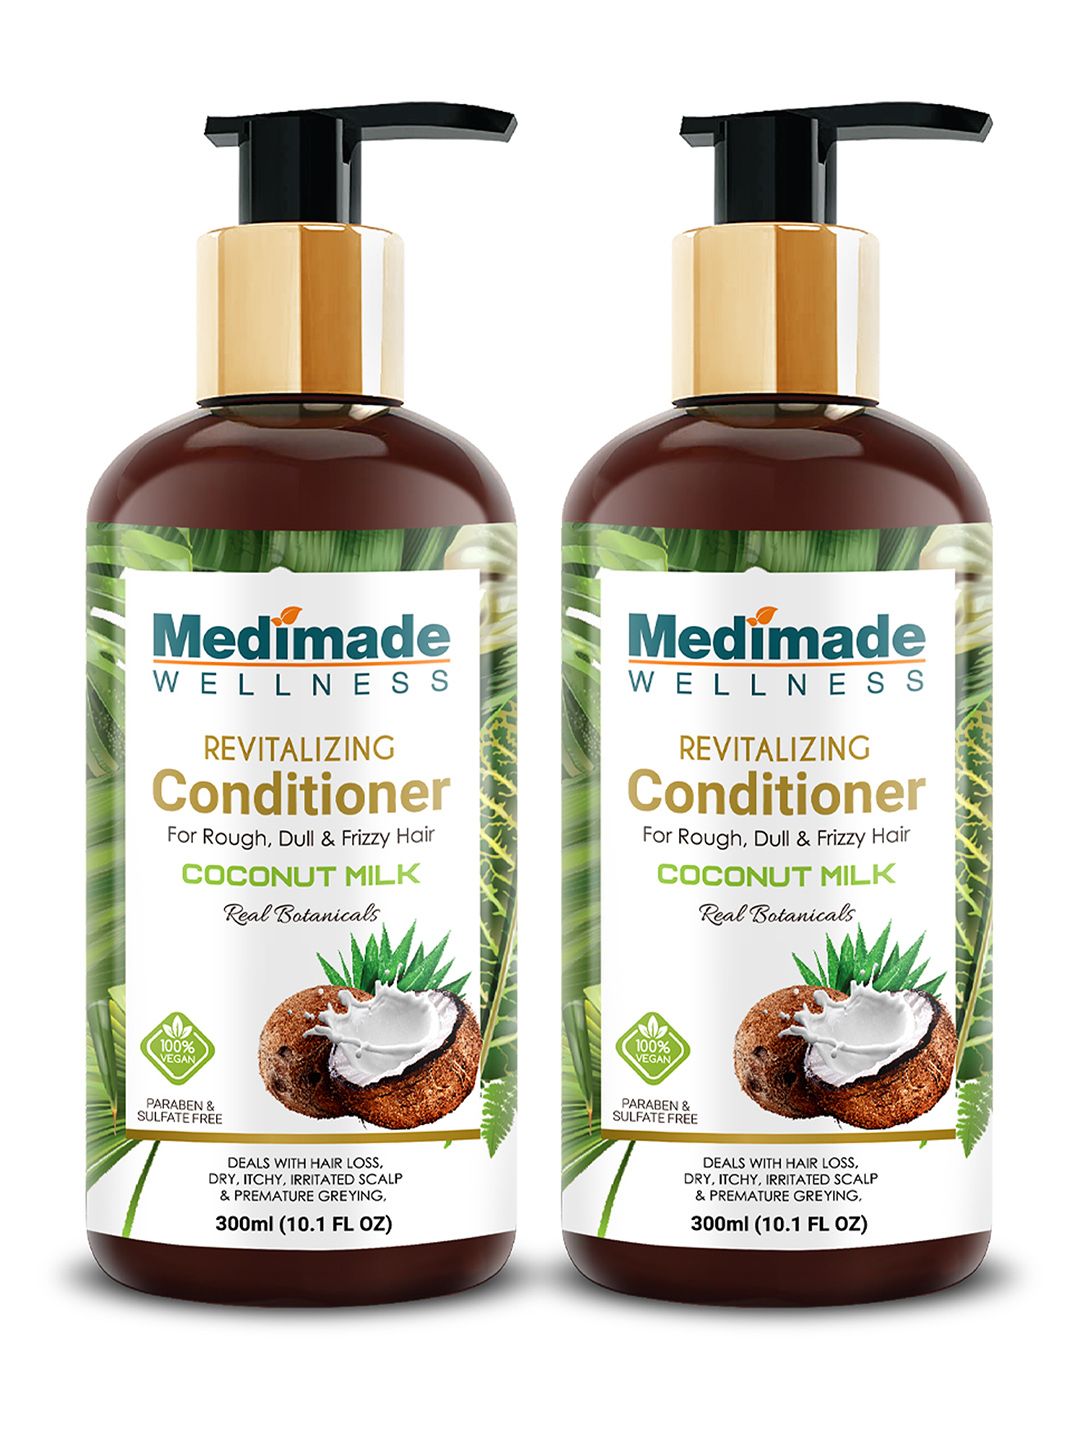 Medimade Pack of 2 Revitalizing Conditioner with Coconut Milk - 300ml Each Price in India